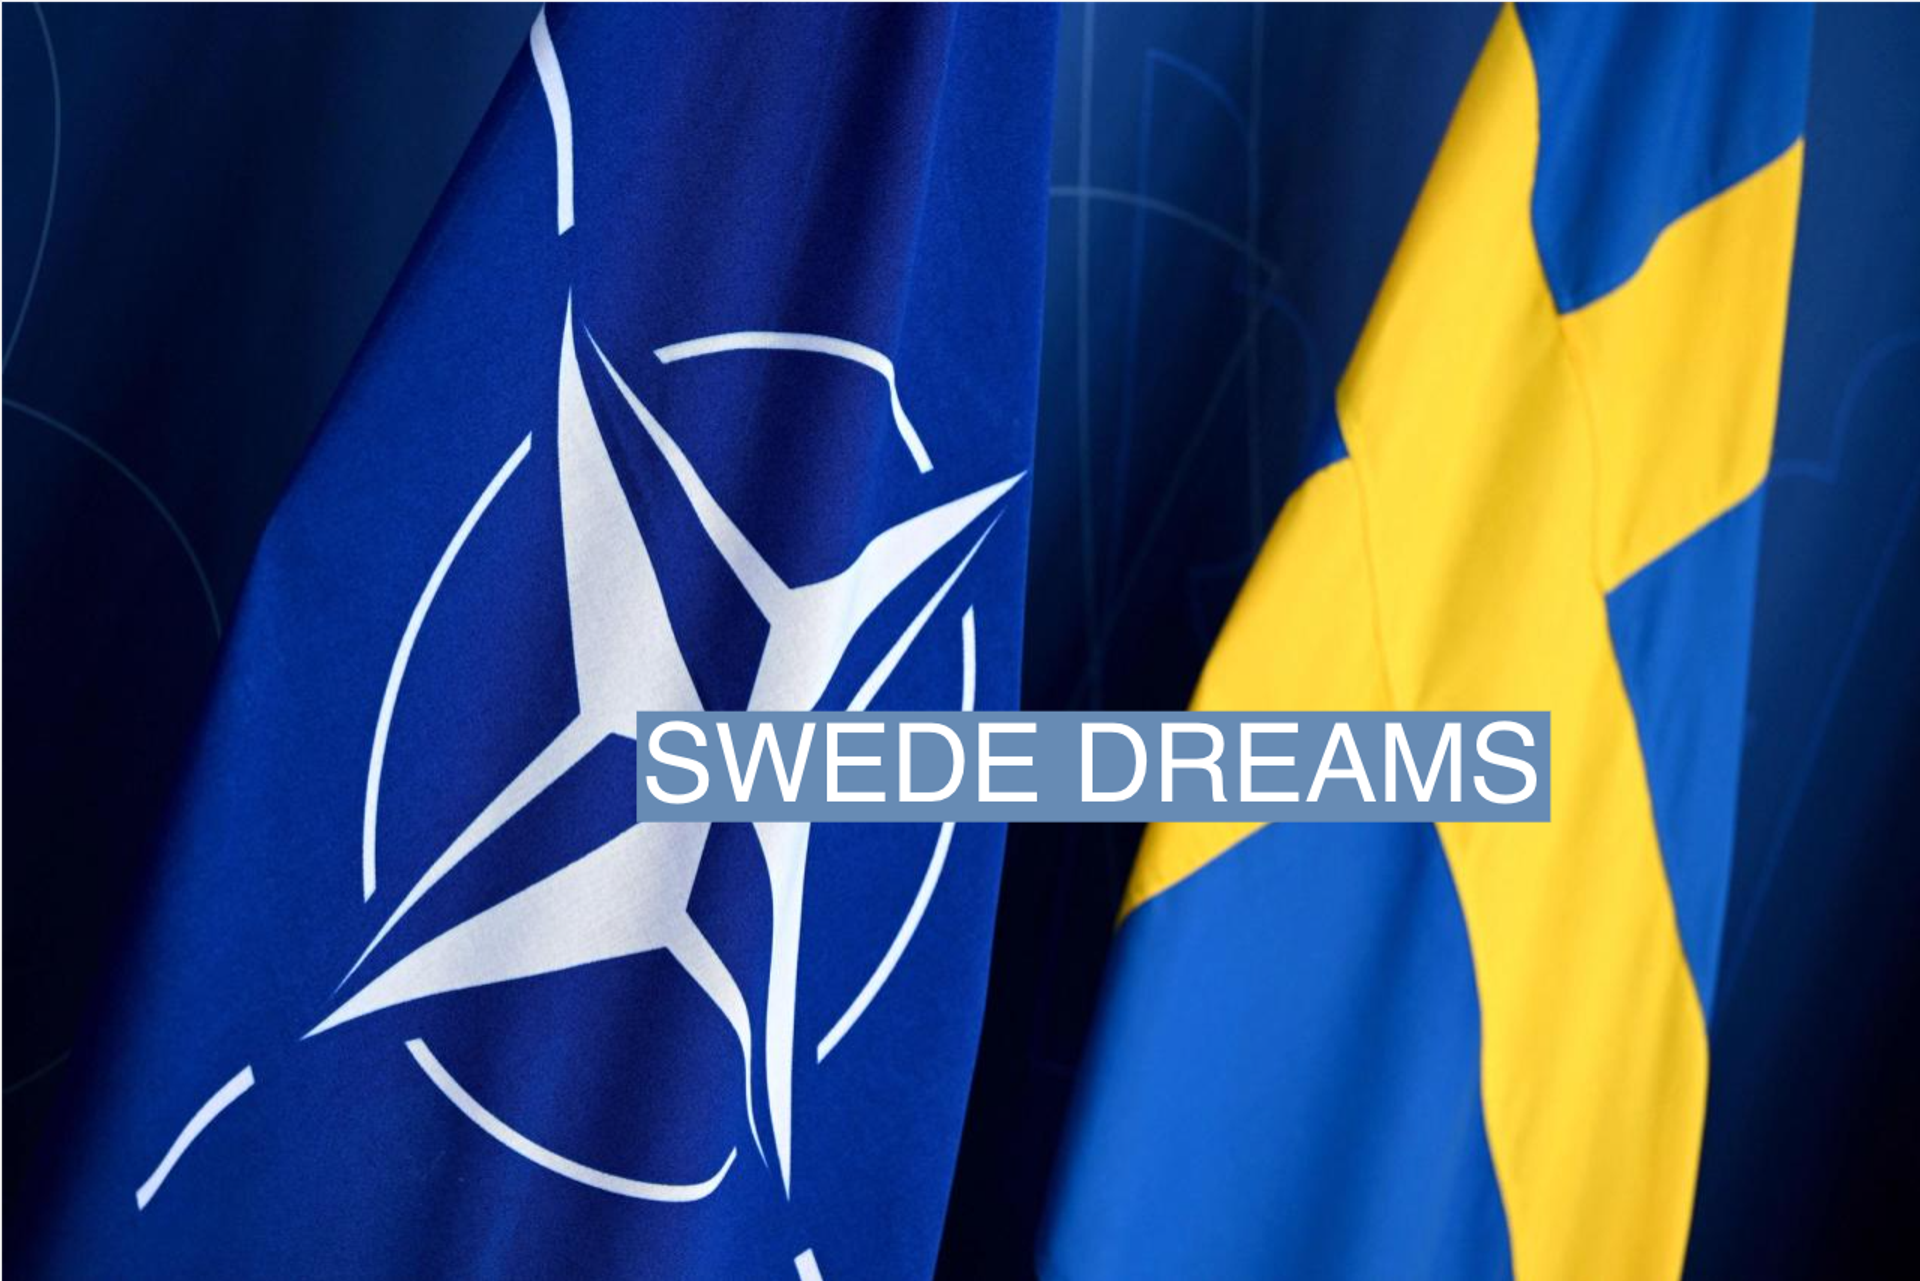 The flags of Sweden (R) and NATO are pictured during a press conference of Sweden's Prime Minister with the NATO Secretary General on October 24, 2023 in Stockholm, Sweden. President Recep Tayyip Erdogan of Turkey officially submitted Sweden's NATO membership application to parliament on Monday, October 23, 2023, his office said, bringing closer the possible end of a 17-month diplomatic standoff. Turkey and Hungary are the only NATO members yet to ratify Sweden's membership request, which came after Stockholm dropped its long-standing policy of non-alignment last year after Russia launched its war on Ukraine. 